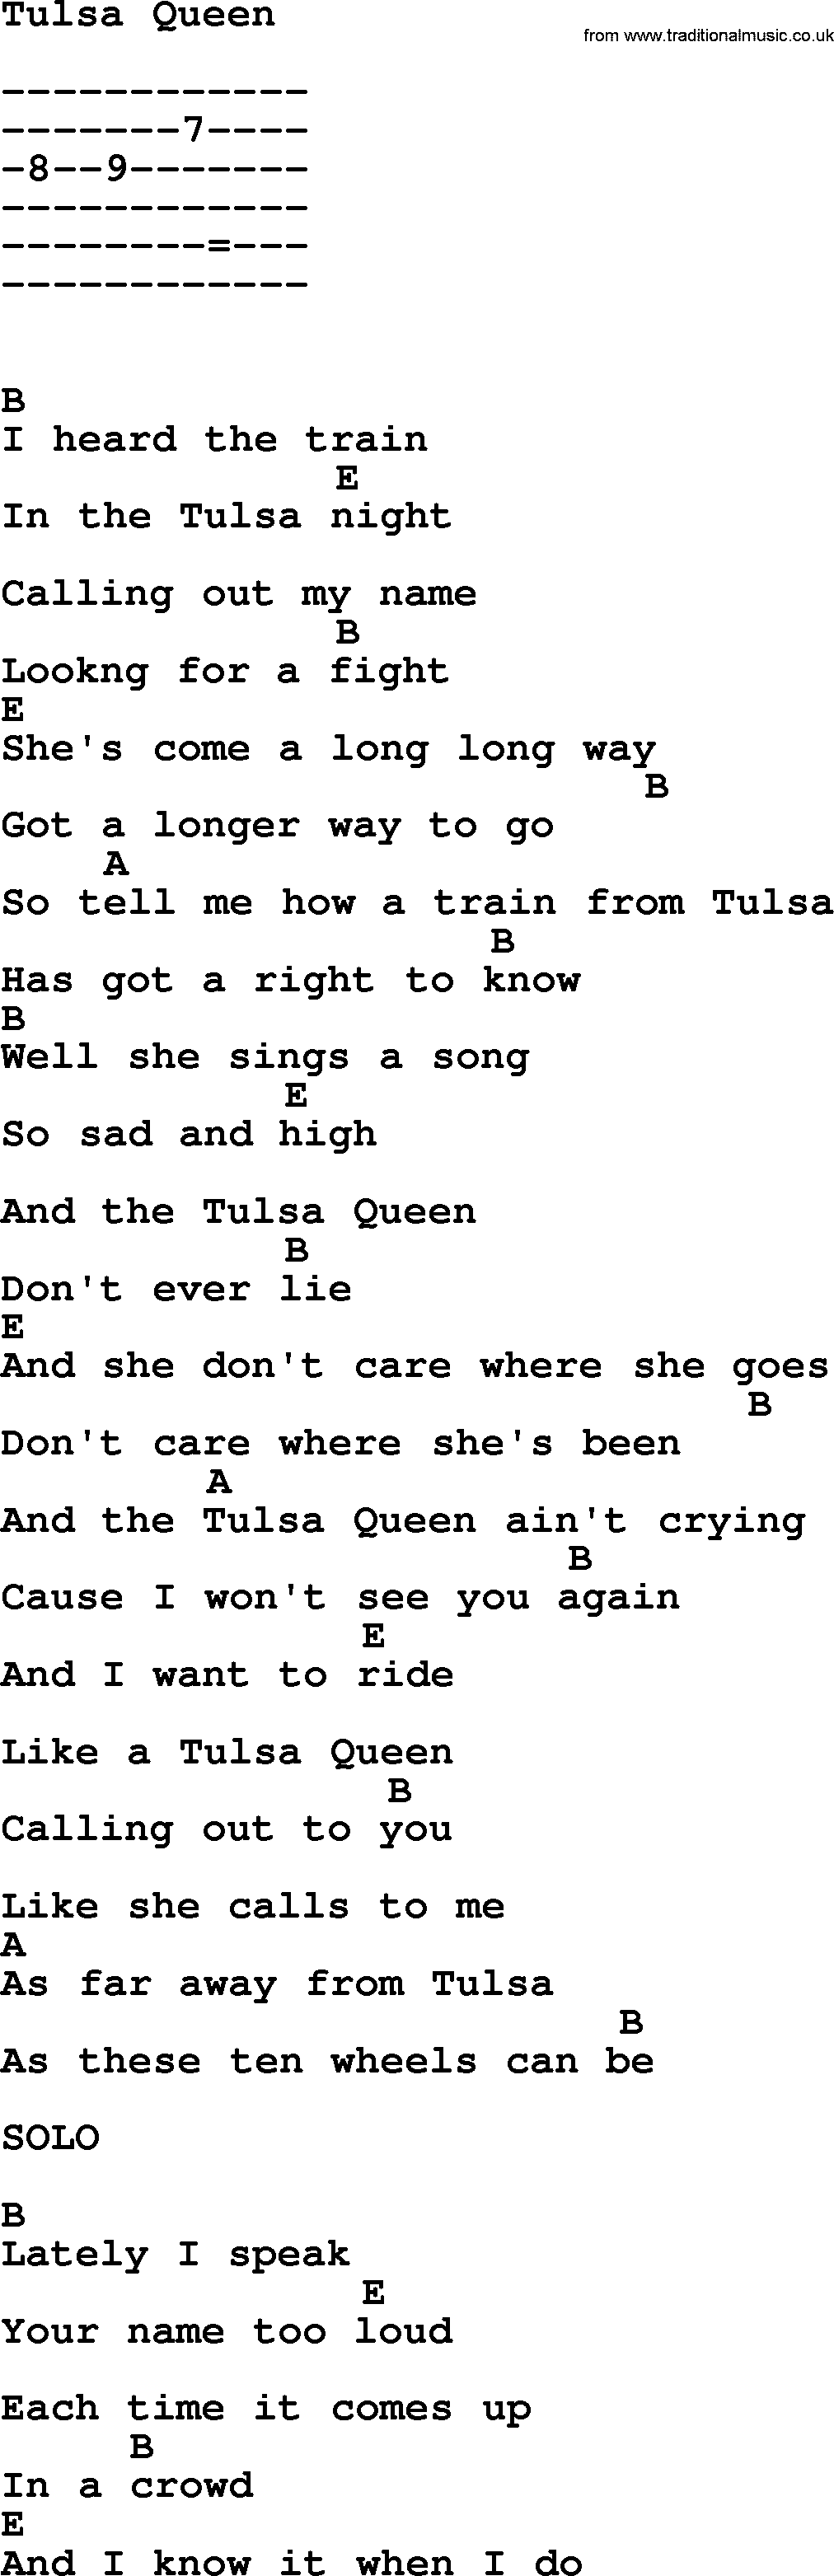 Emmylou Harris song: Tulsa Queen lyrics and chords